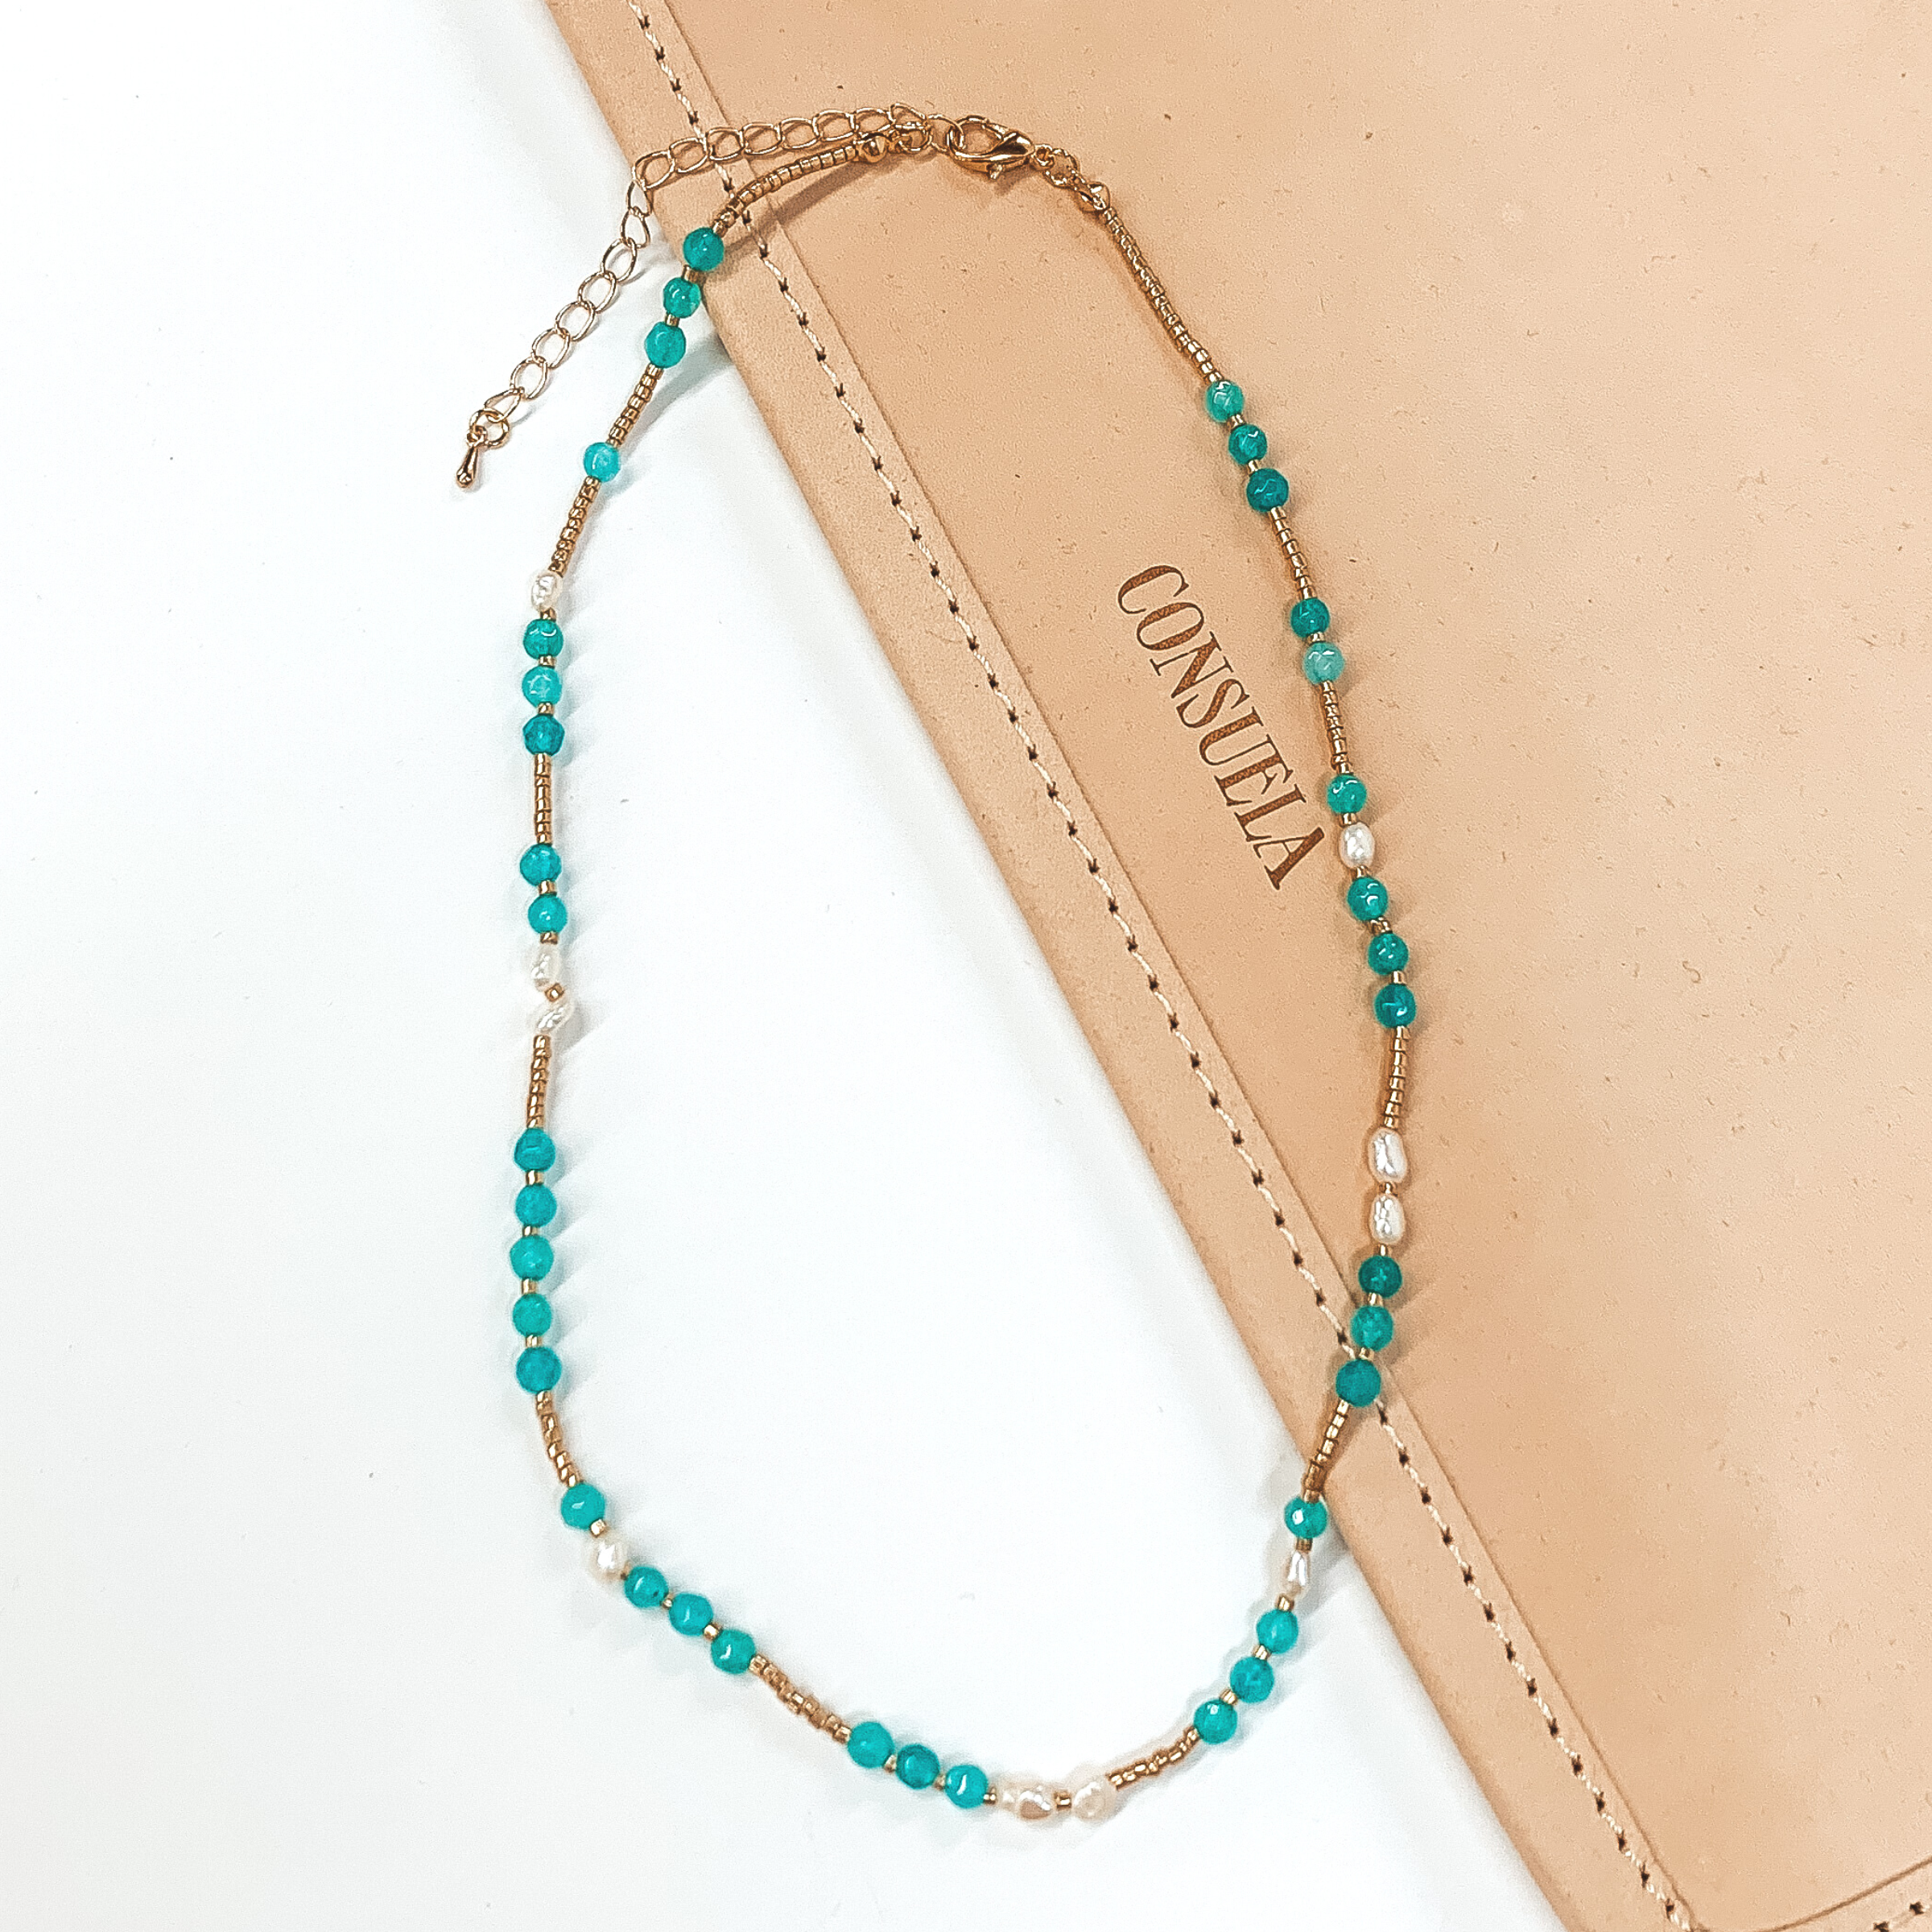 This necklace include gold beads, white pearl beads, and turquoise crystal beads. This necklace is pictured on a white and tan background. 